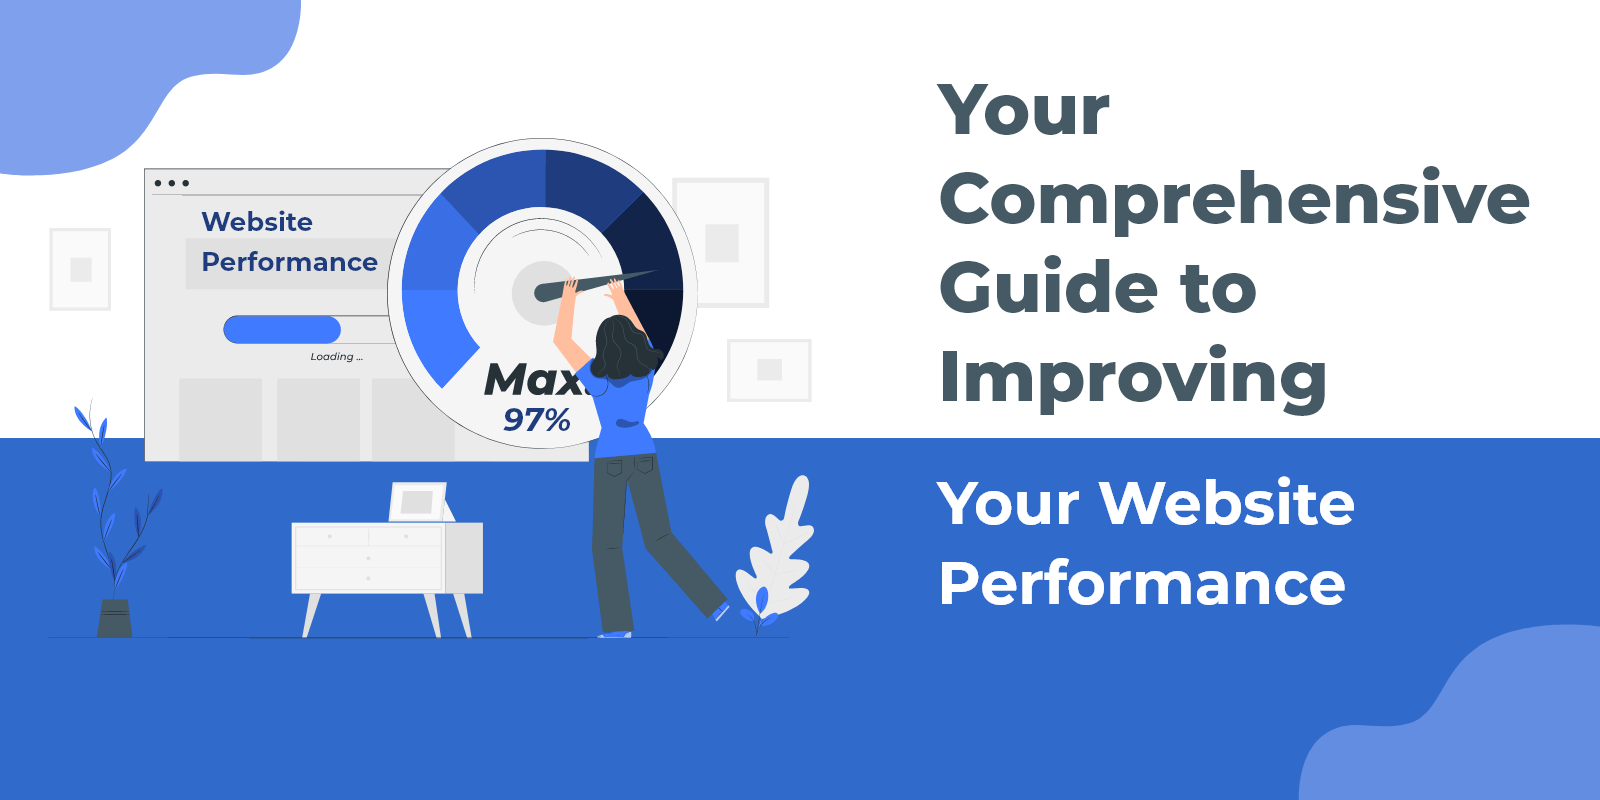 Your Comprehensive Guide to Improving Your Website Performance